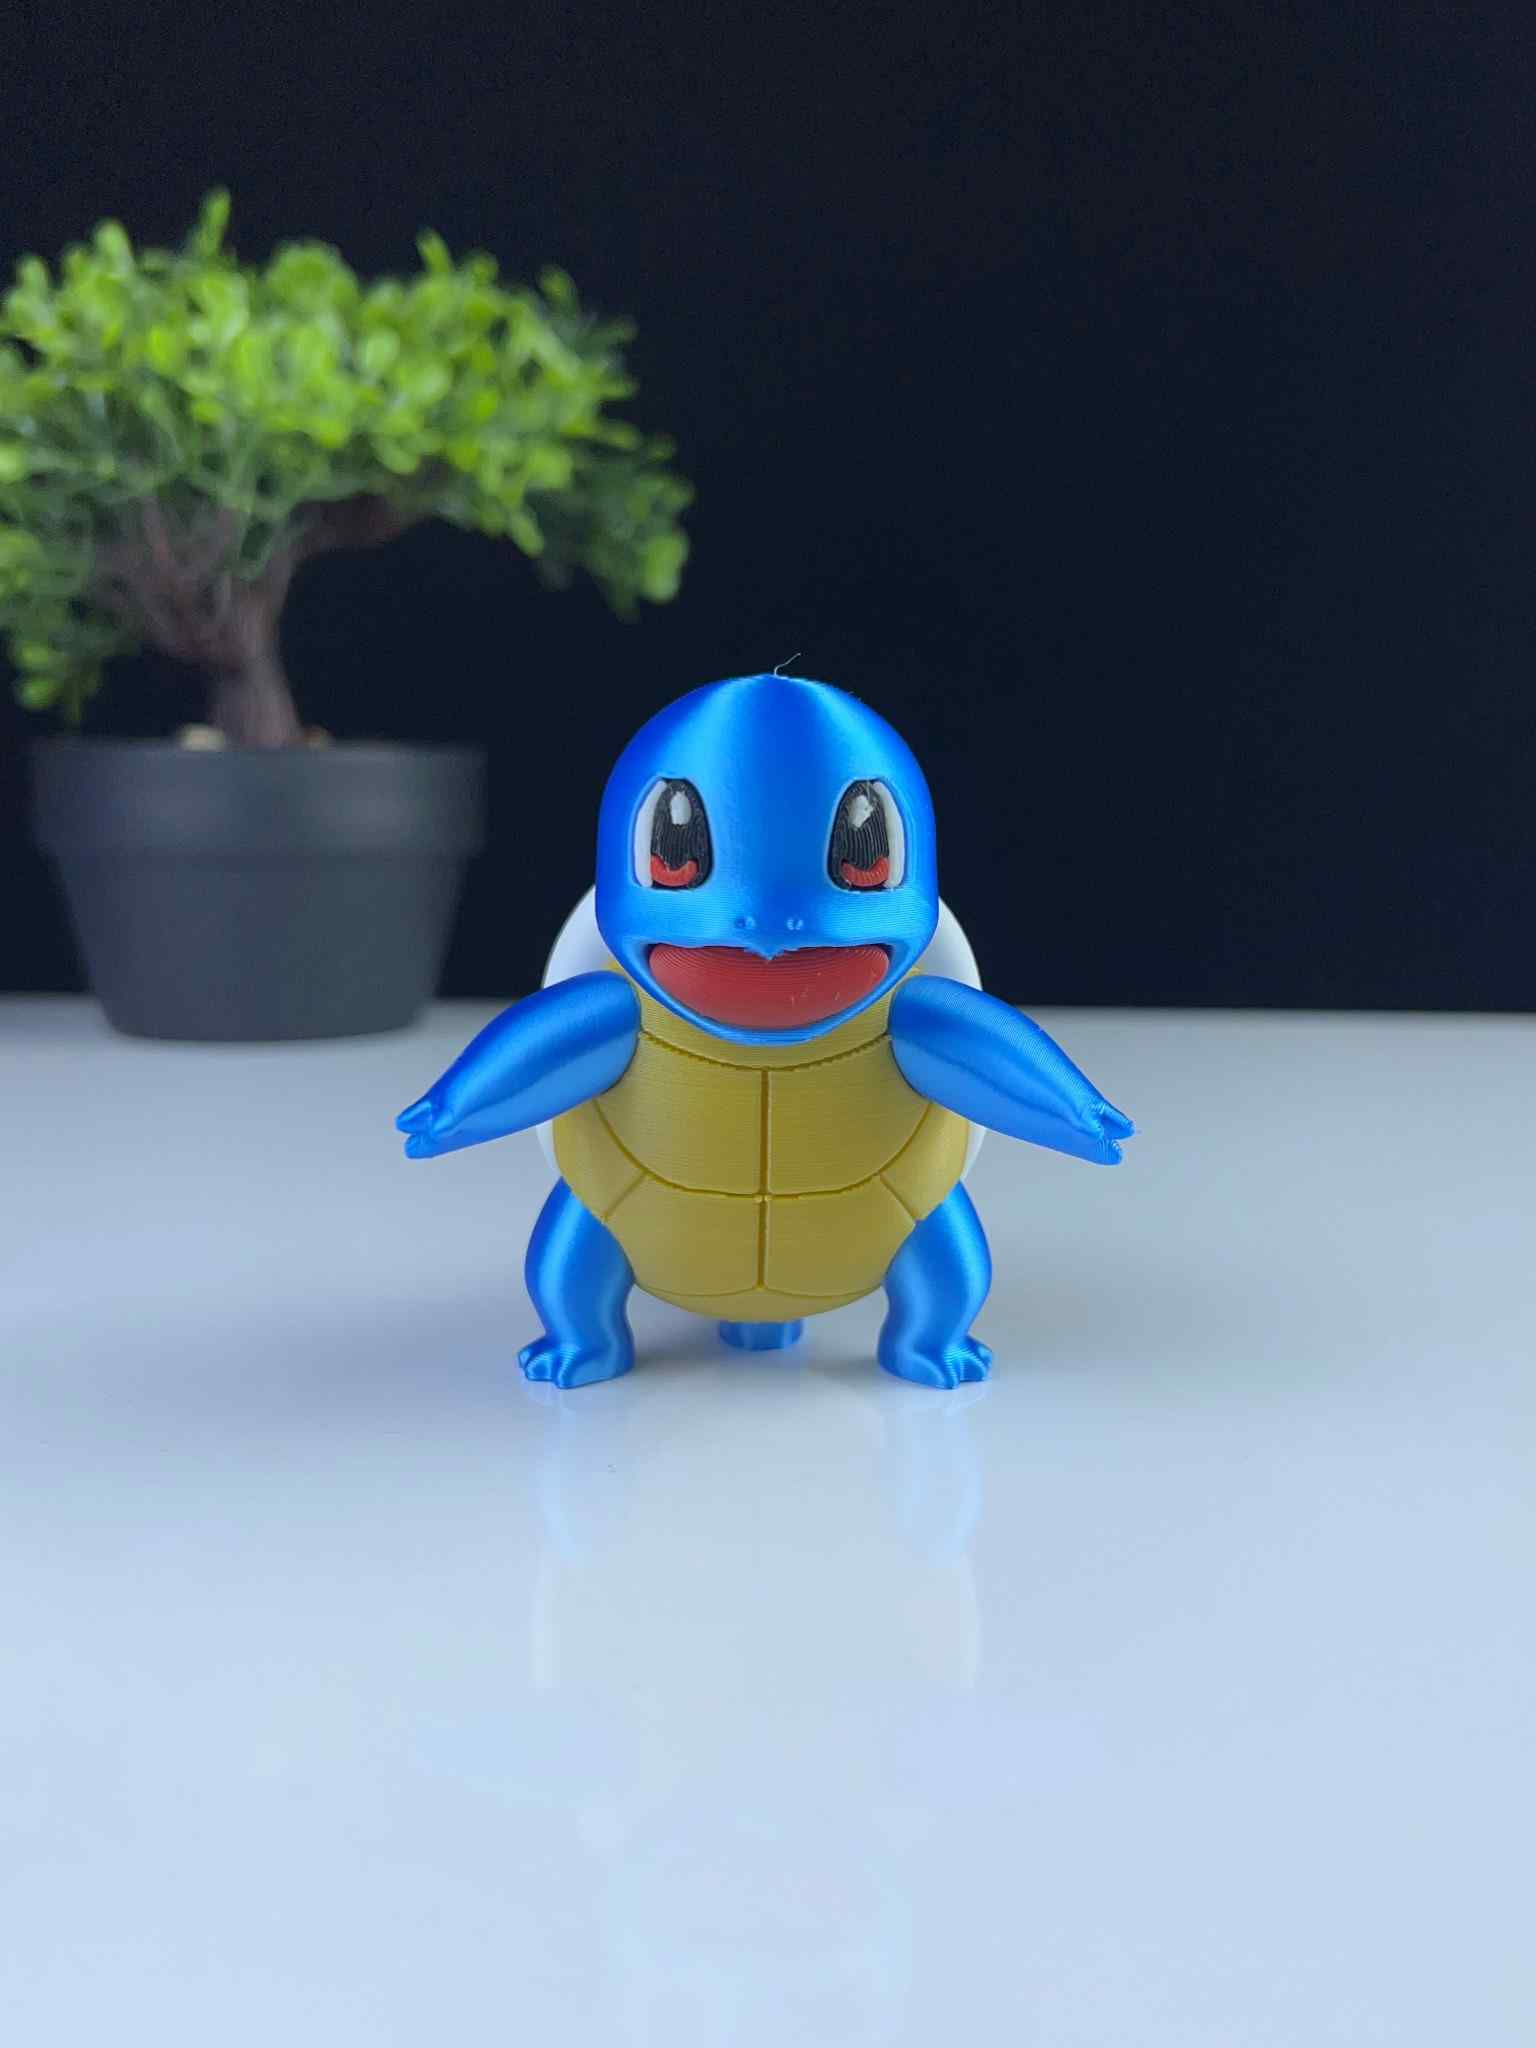 3d print squirtle